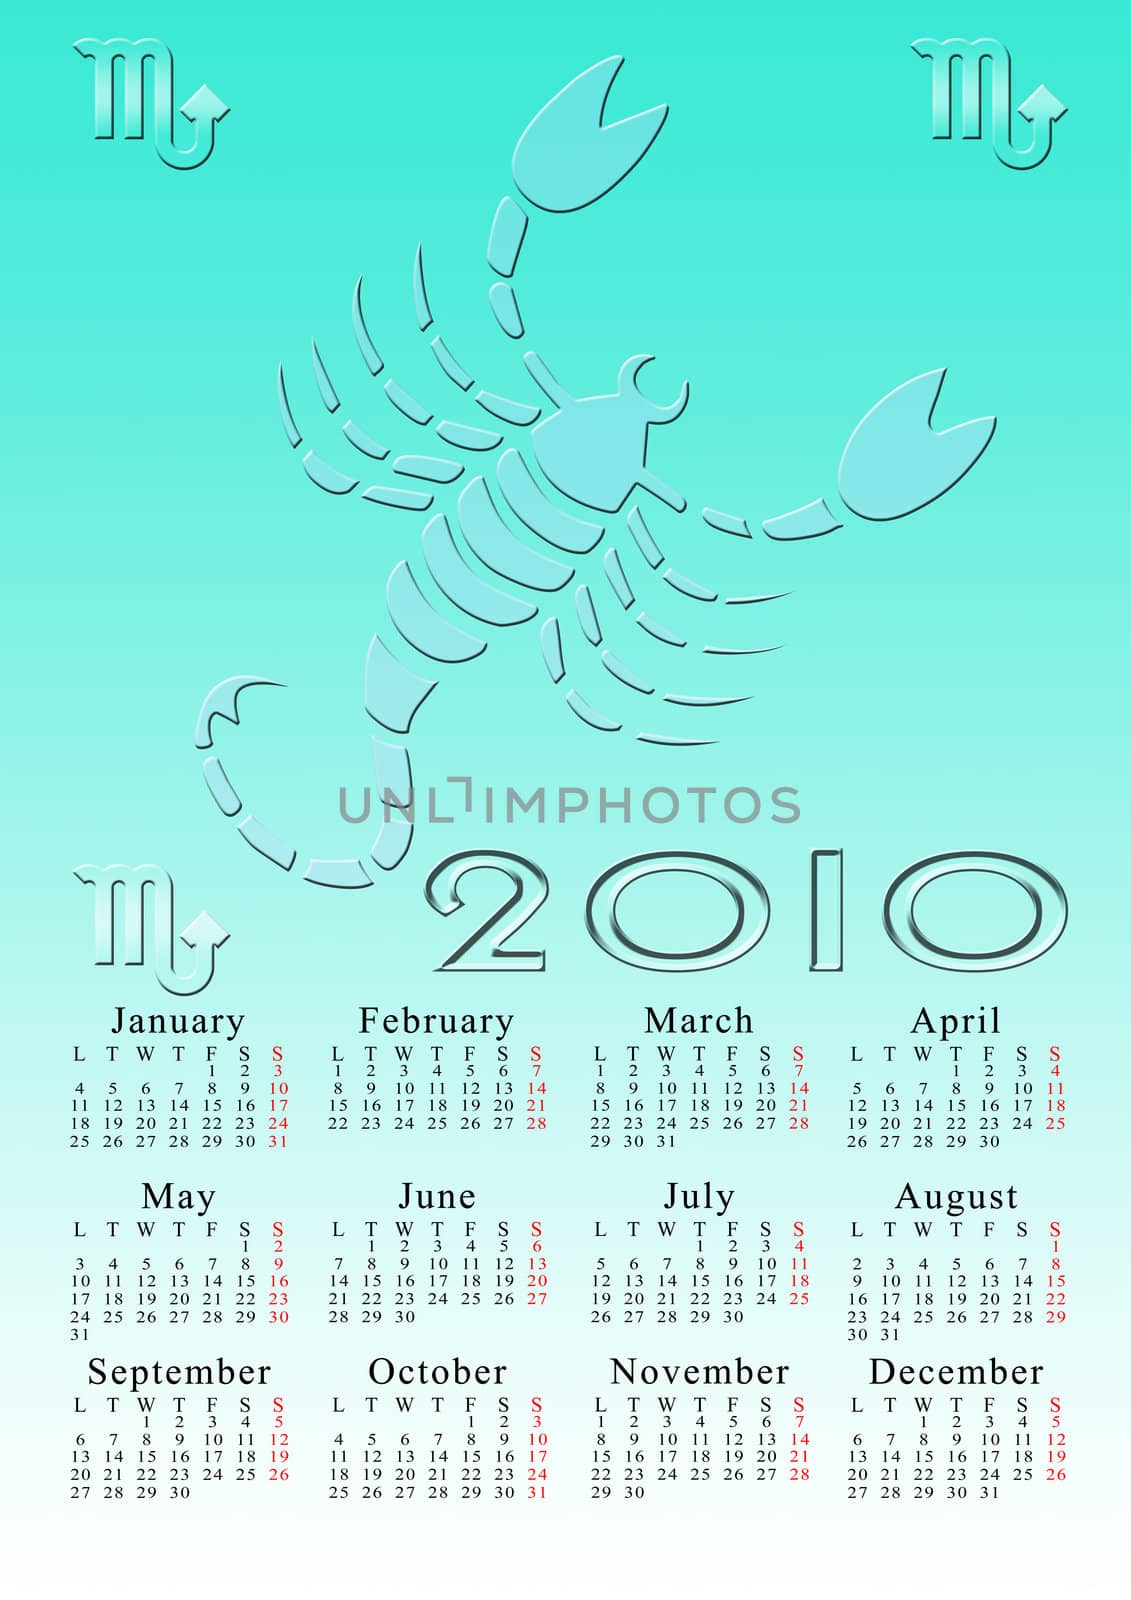 scorpio. calendar for the year 2010 with the astrological sign
